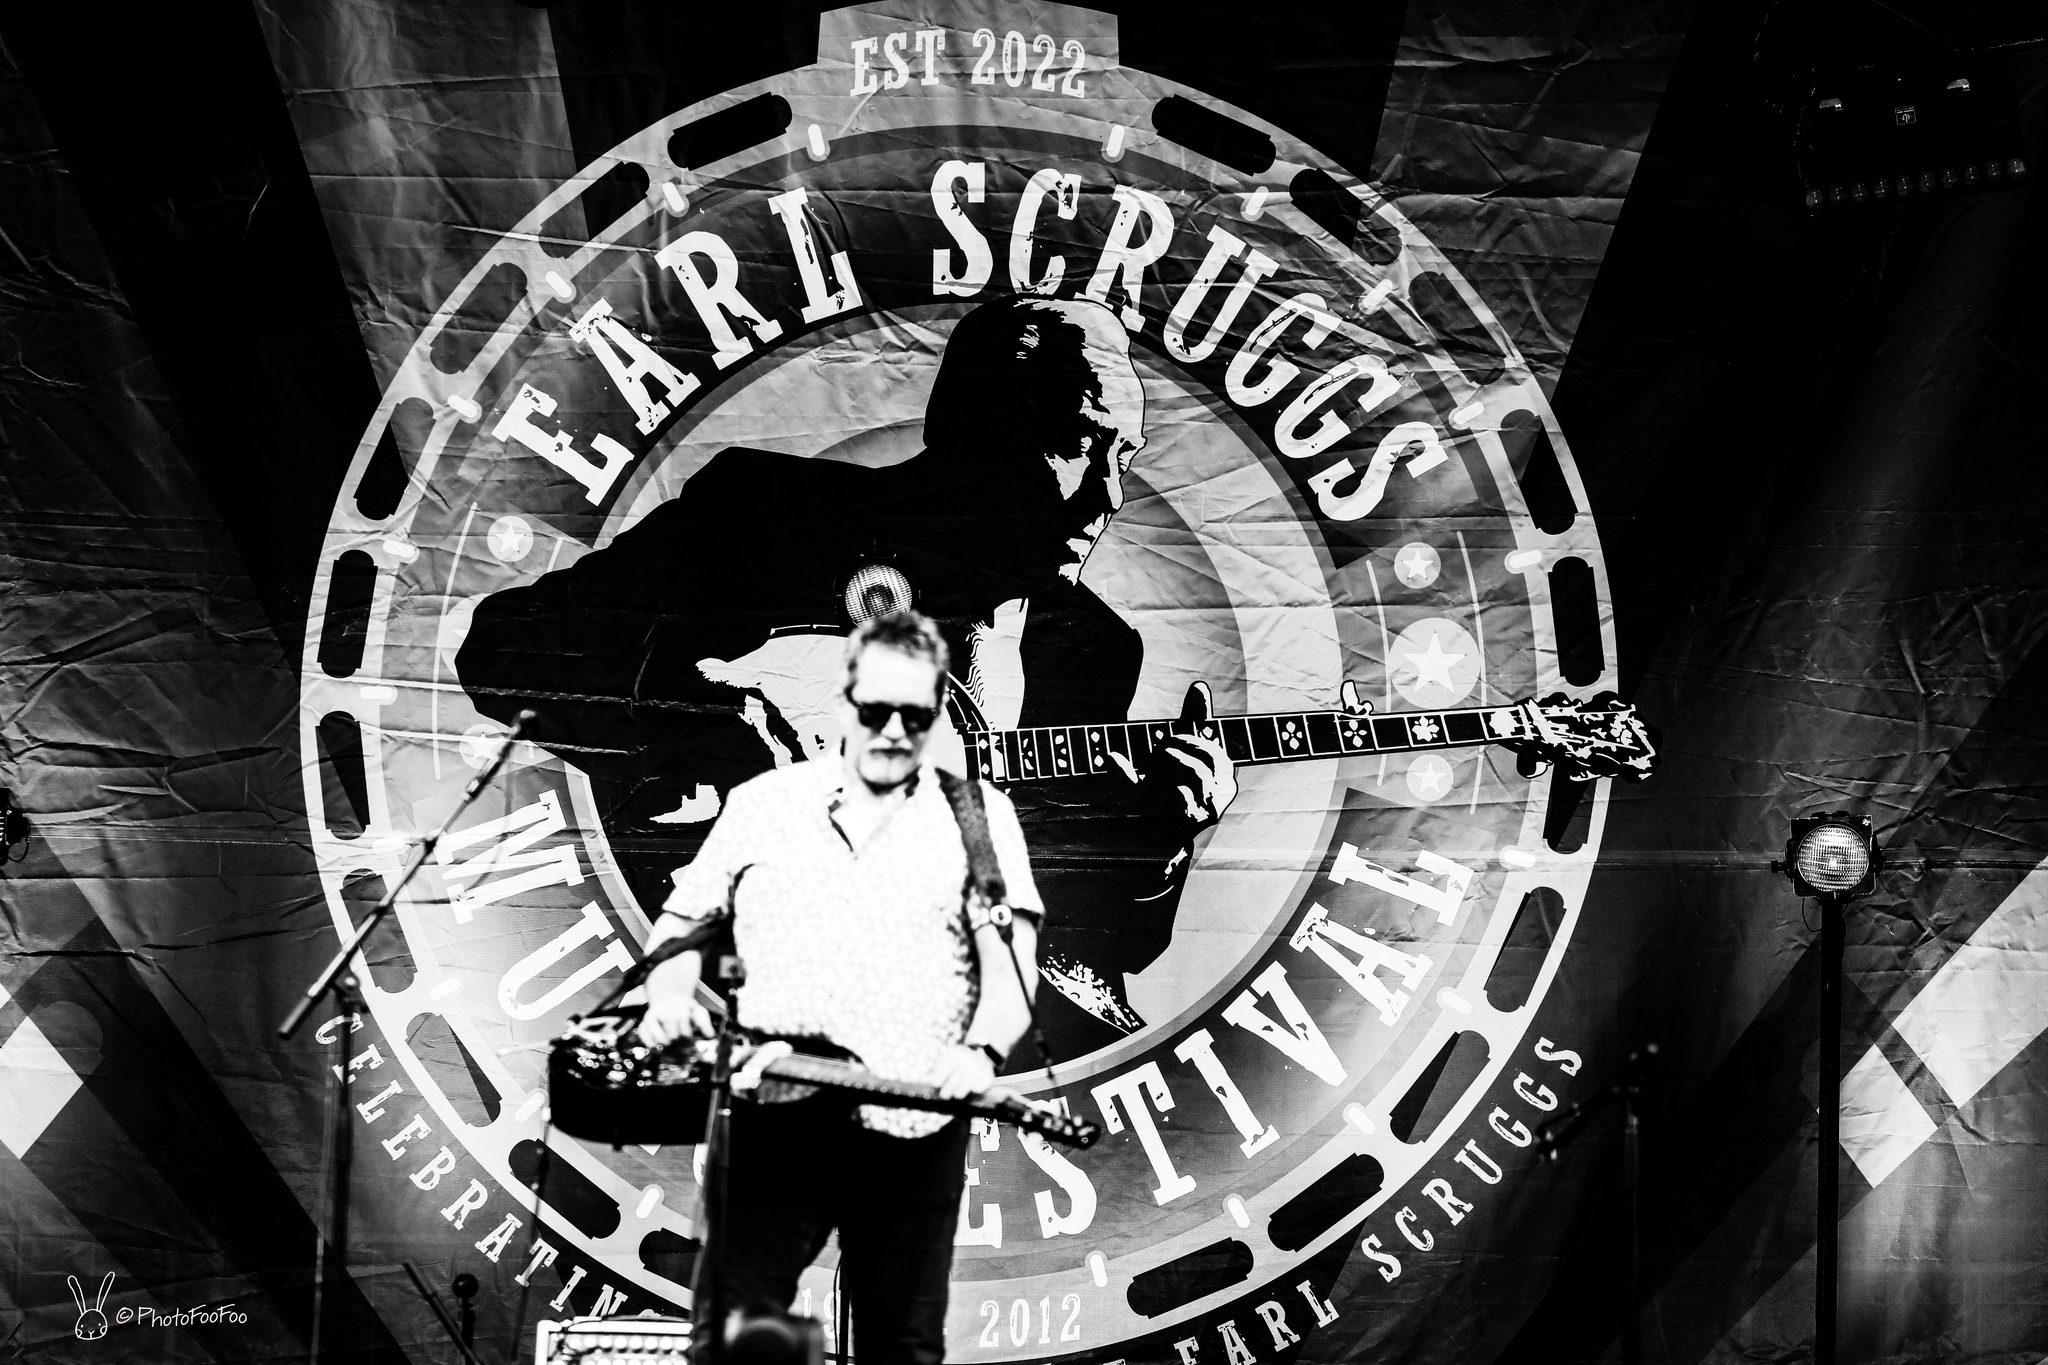 String Theory: Decoding the Magic of the Earl Scruggs Festival